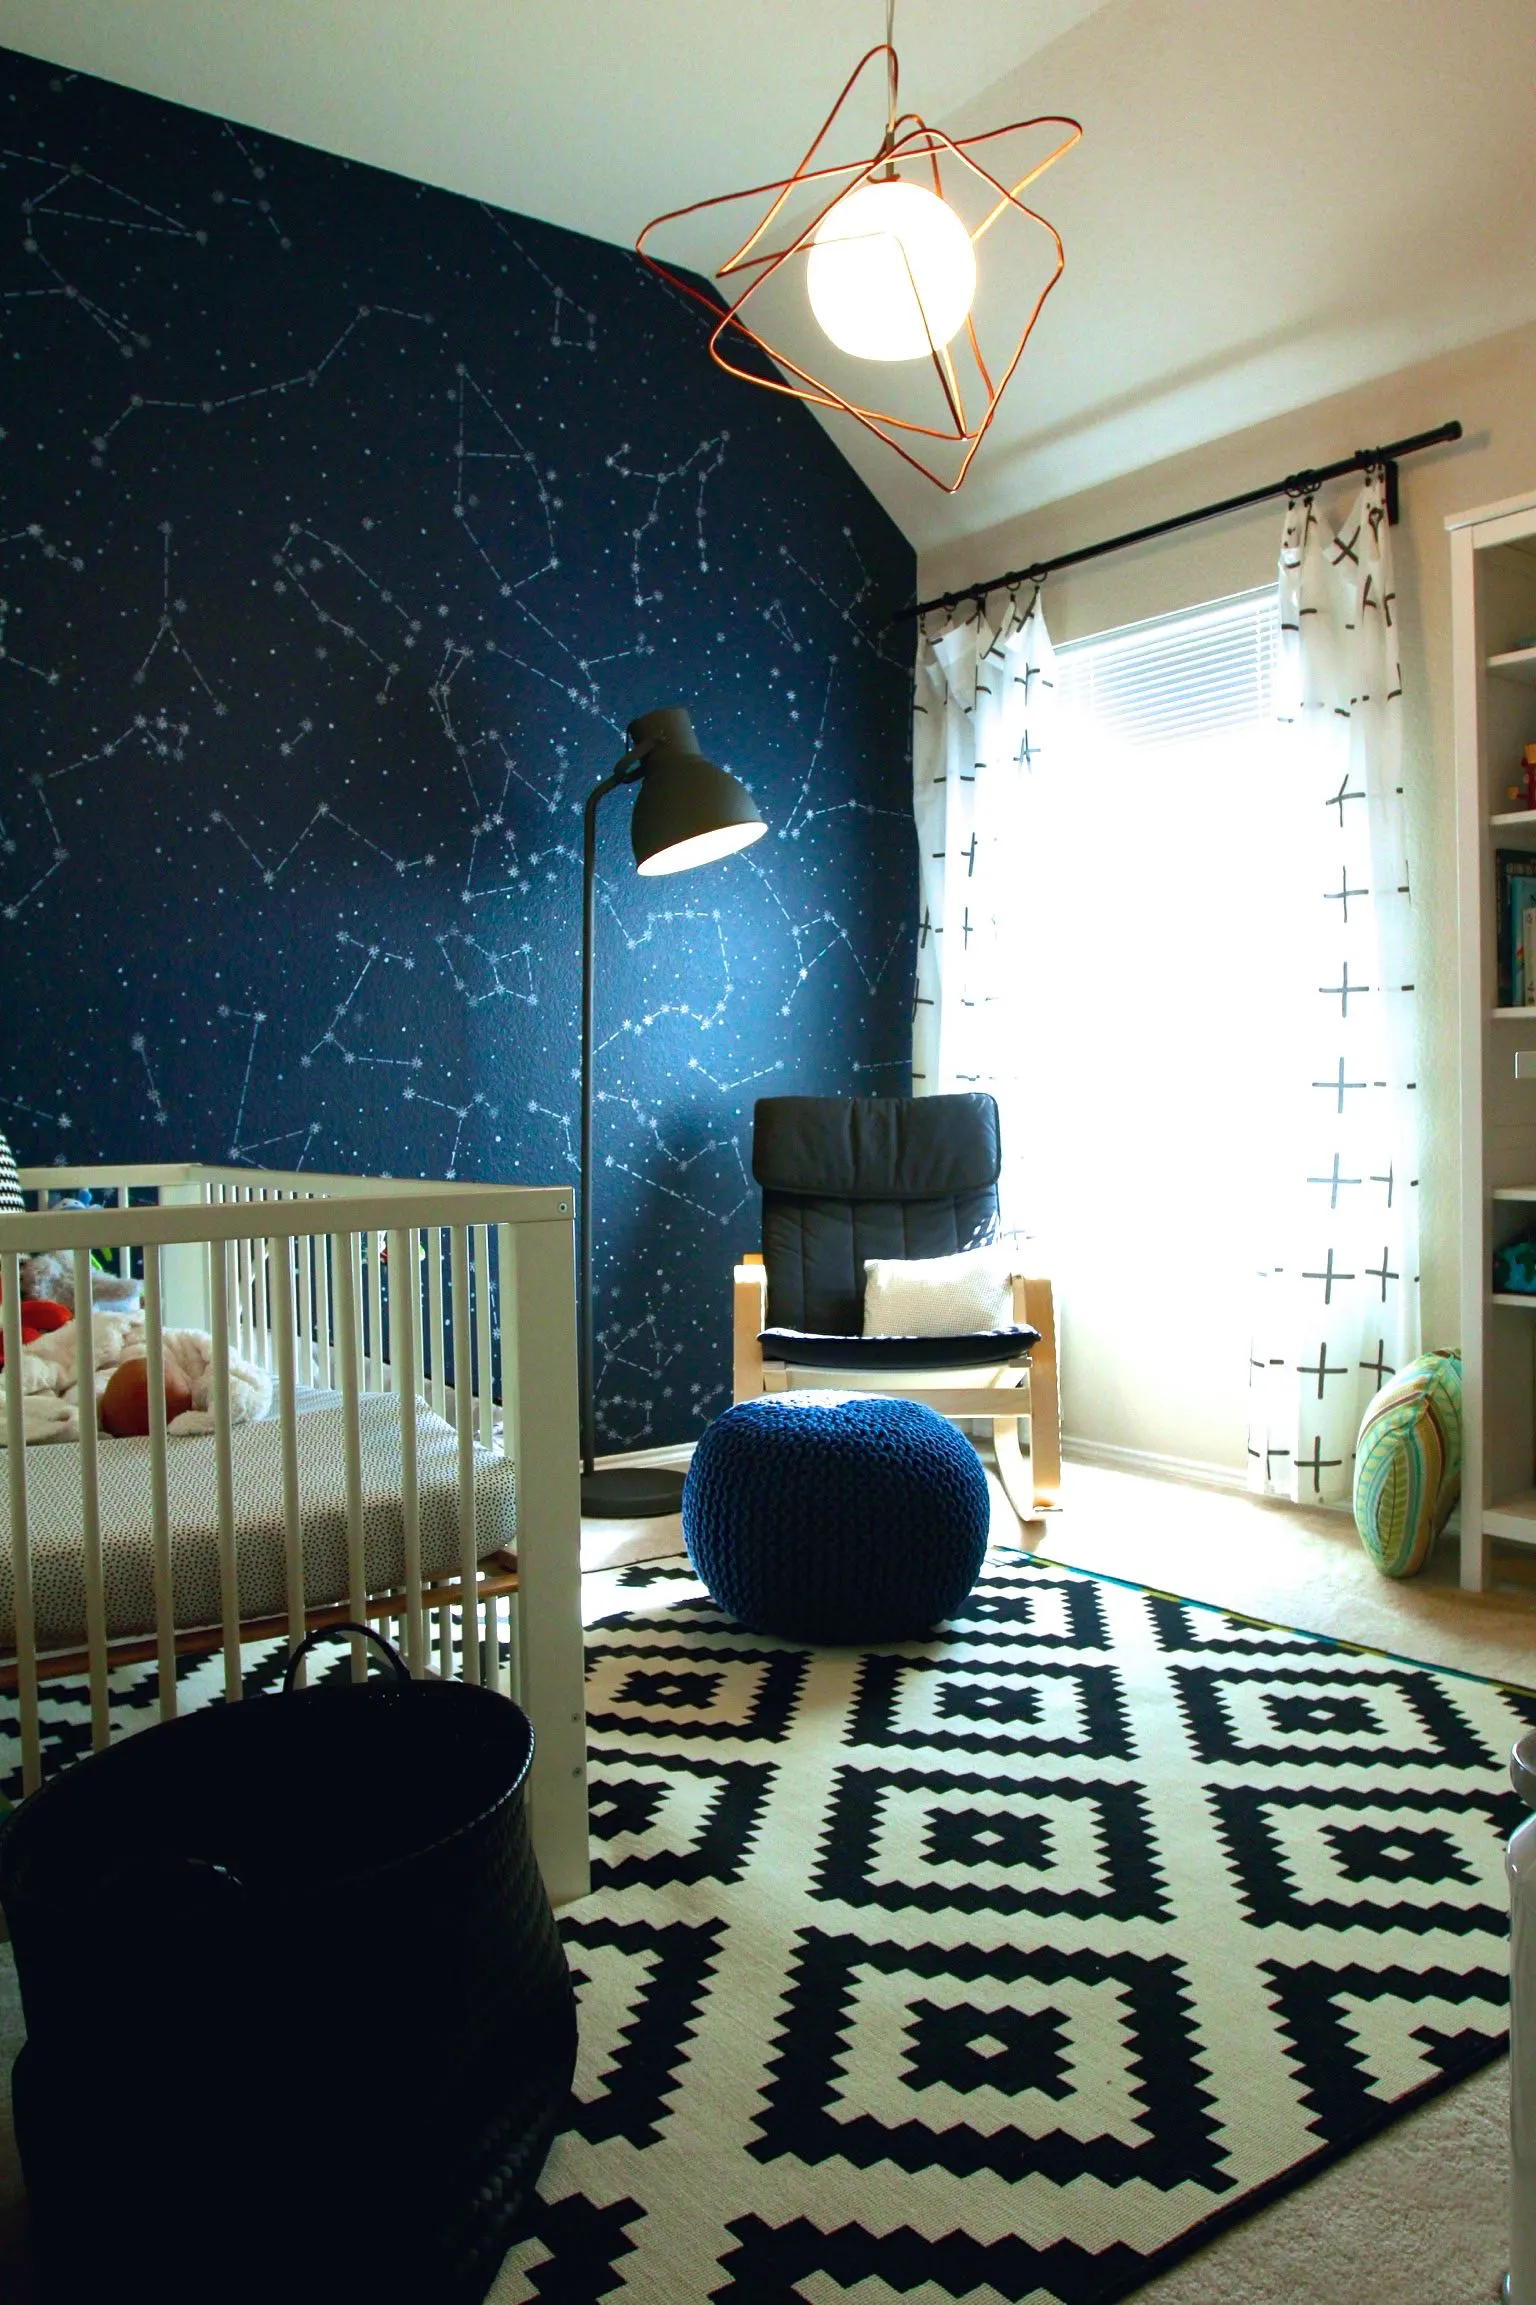 Cosmic Nursery with Constellation Wall